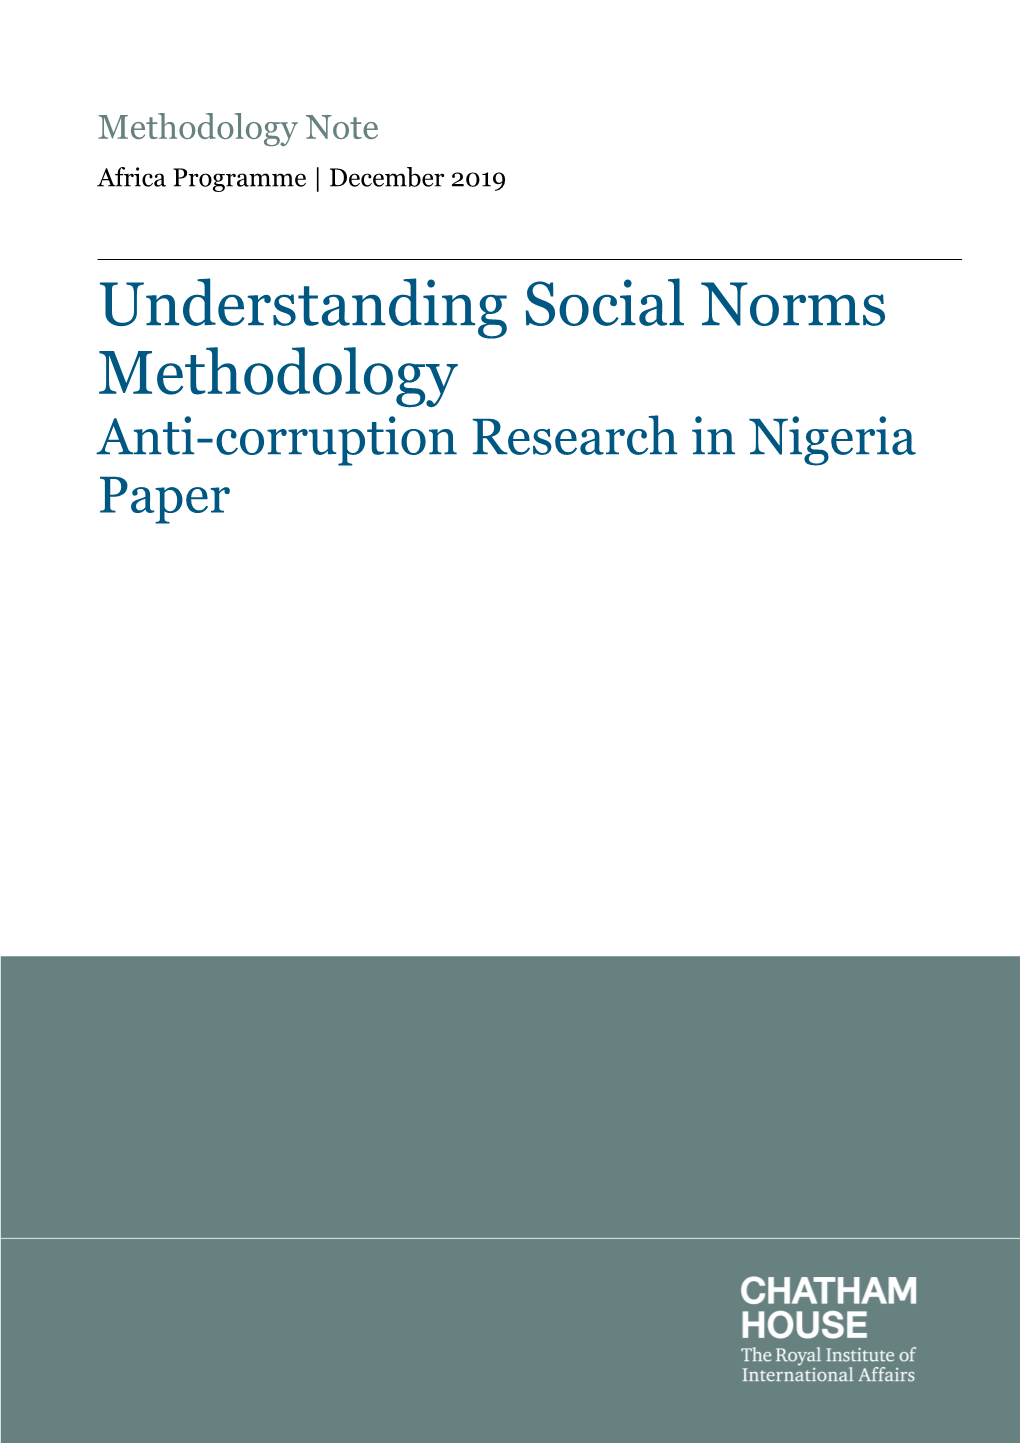 Social Norms Methodology Anti-Corruption Research in Nigeria Paper